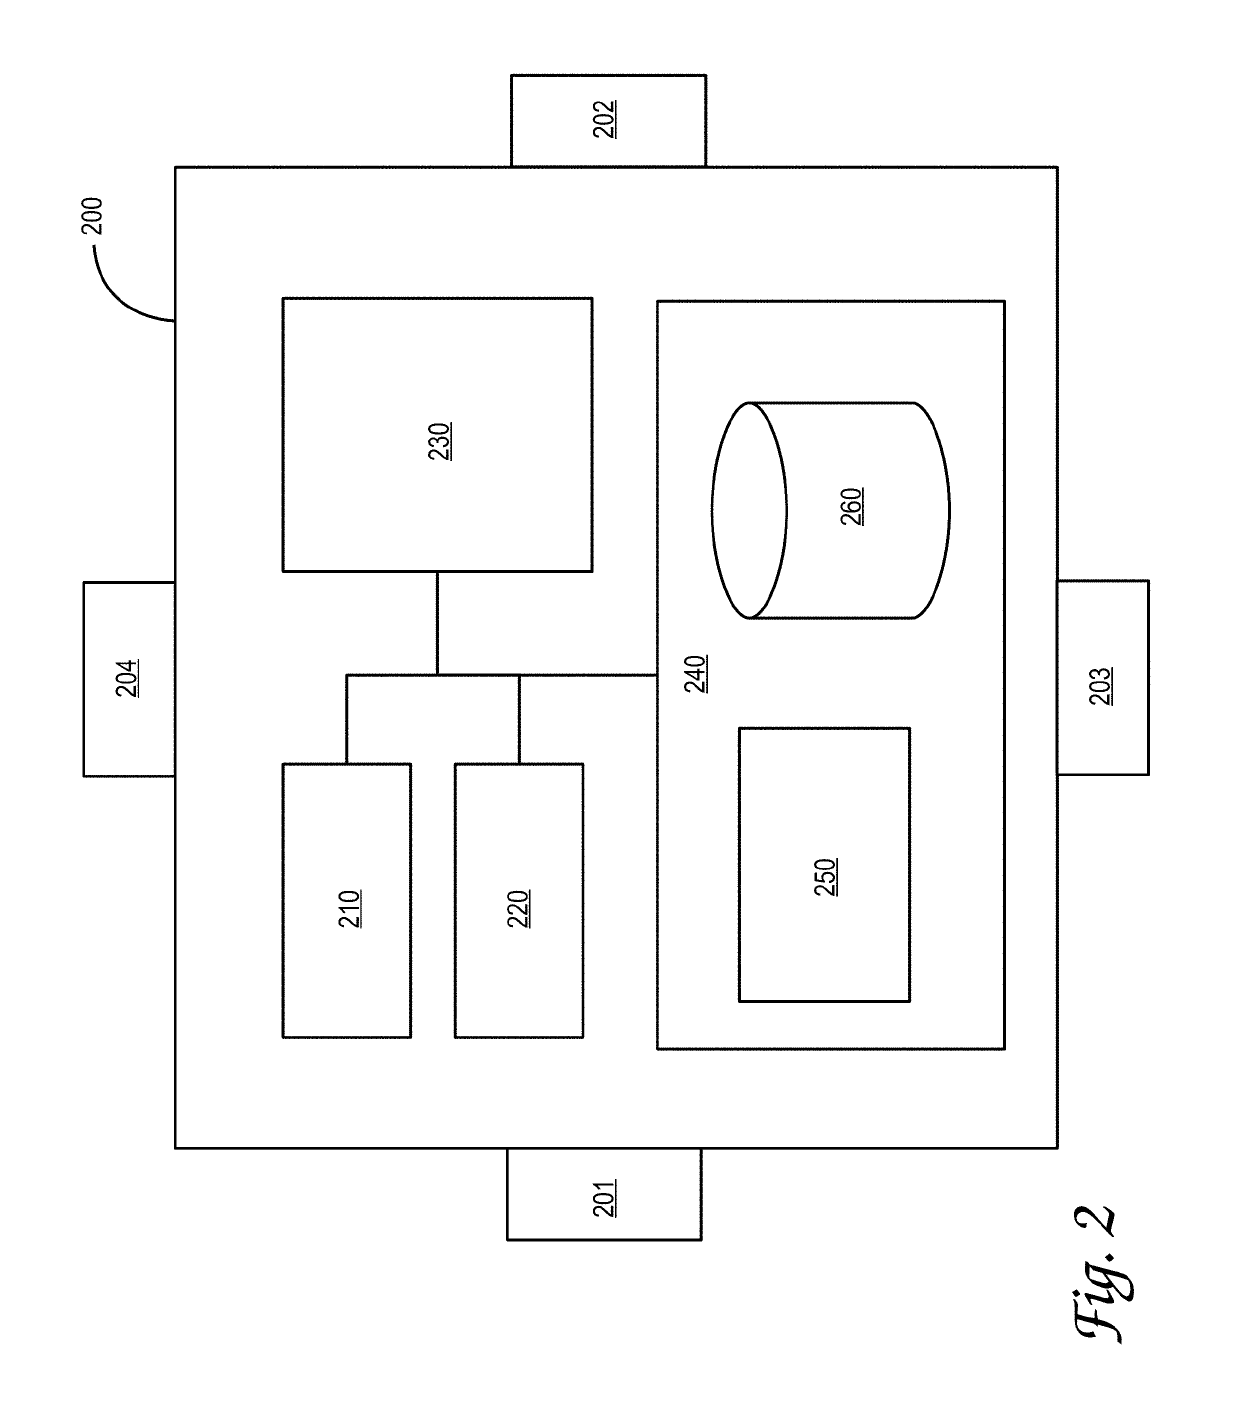 System and method to assist building automation system end user based on alarm parameters